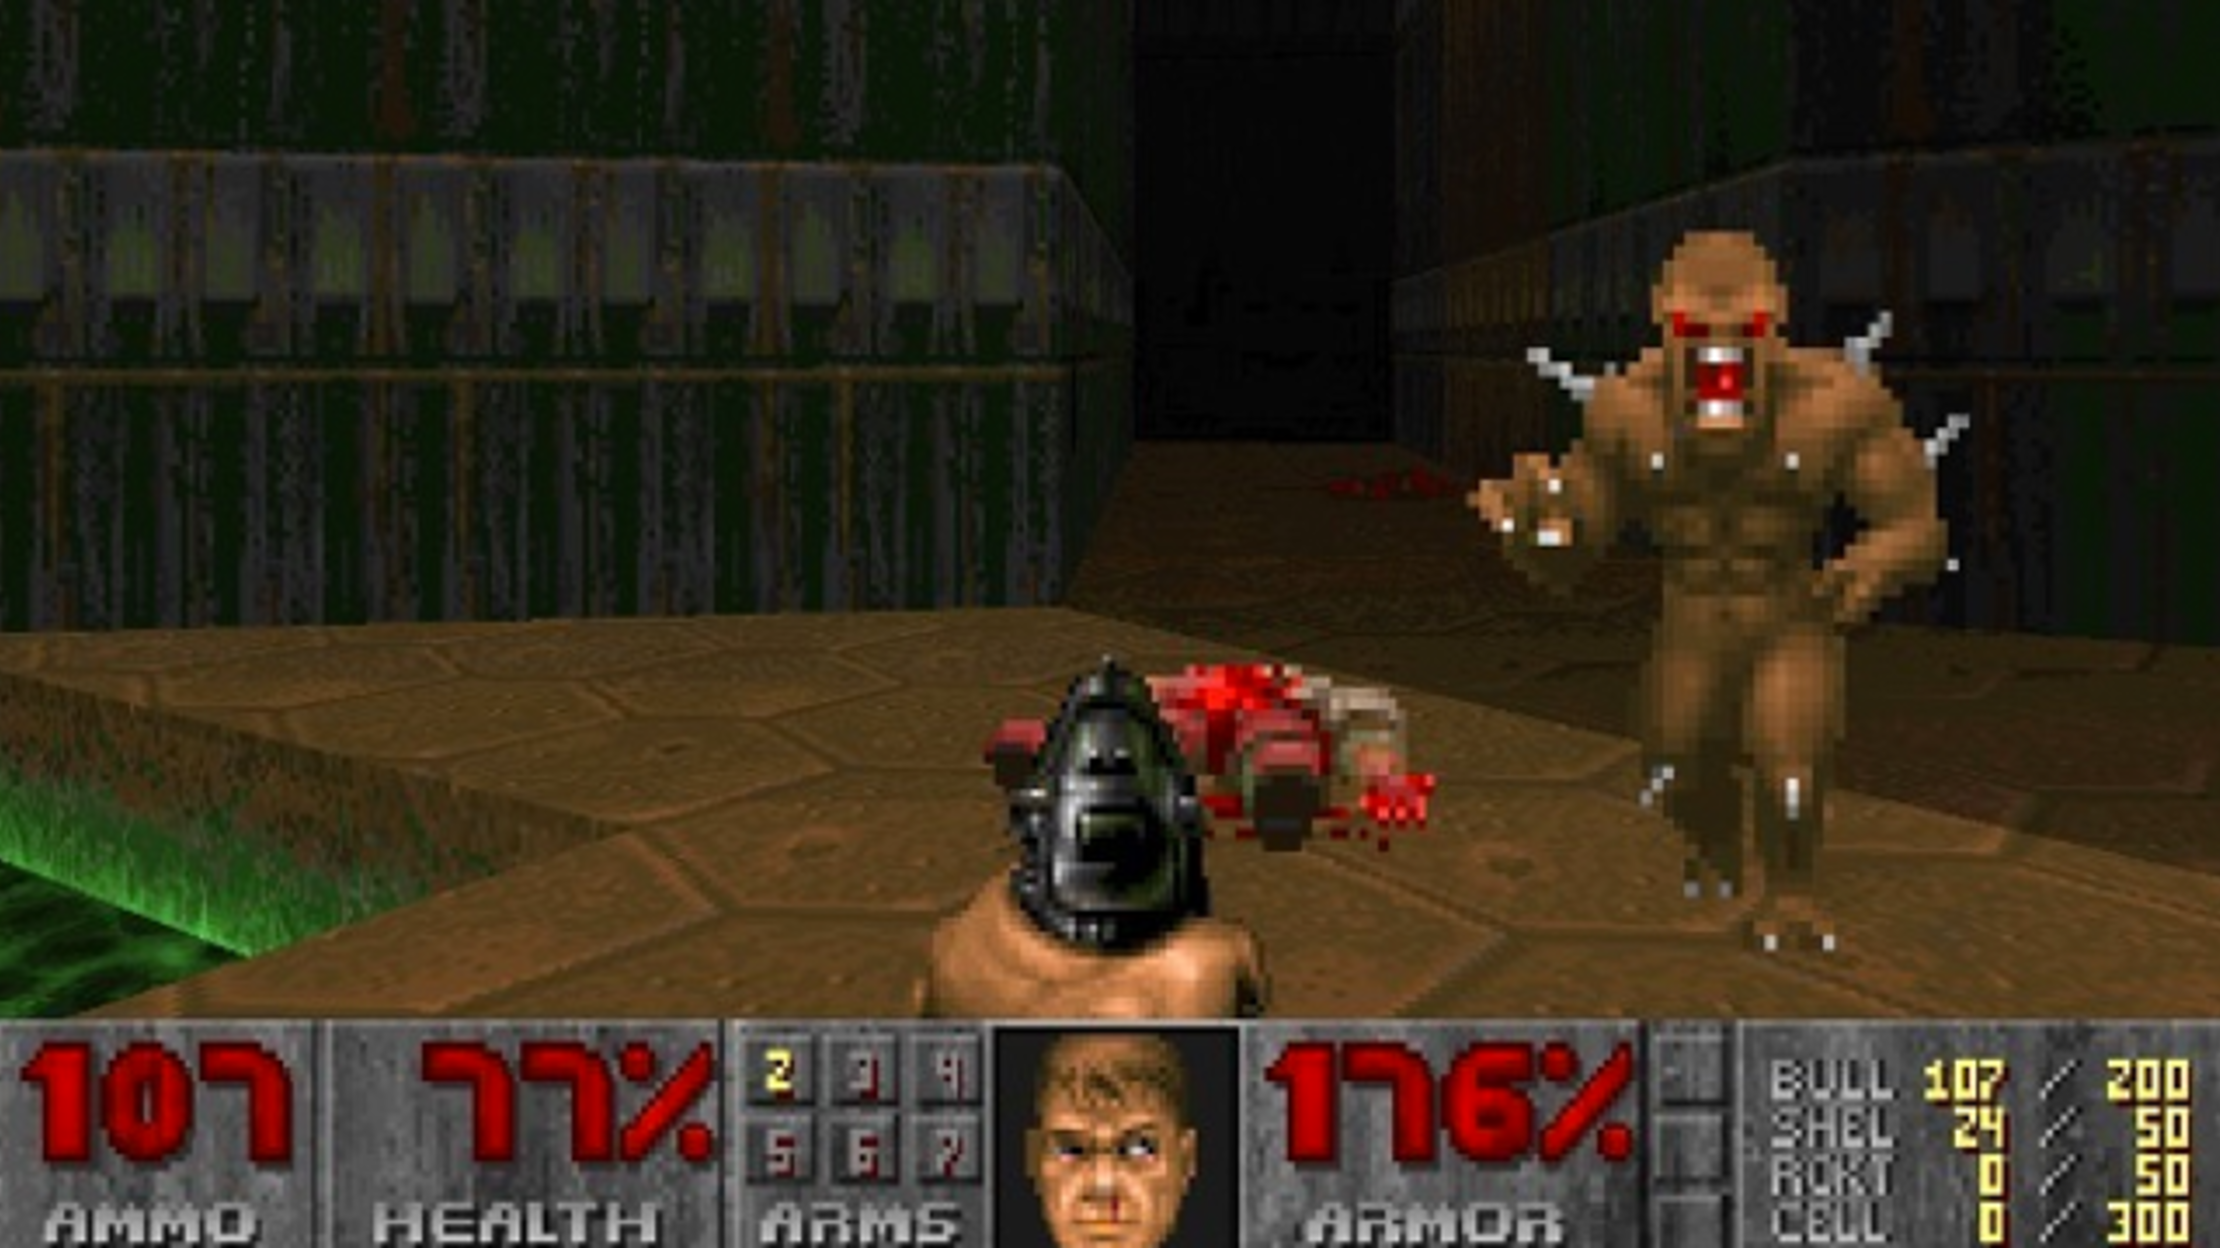 when did the original doom come out